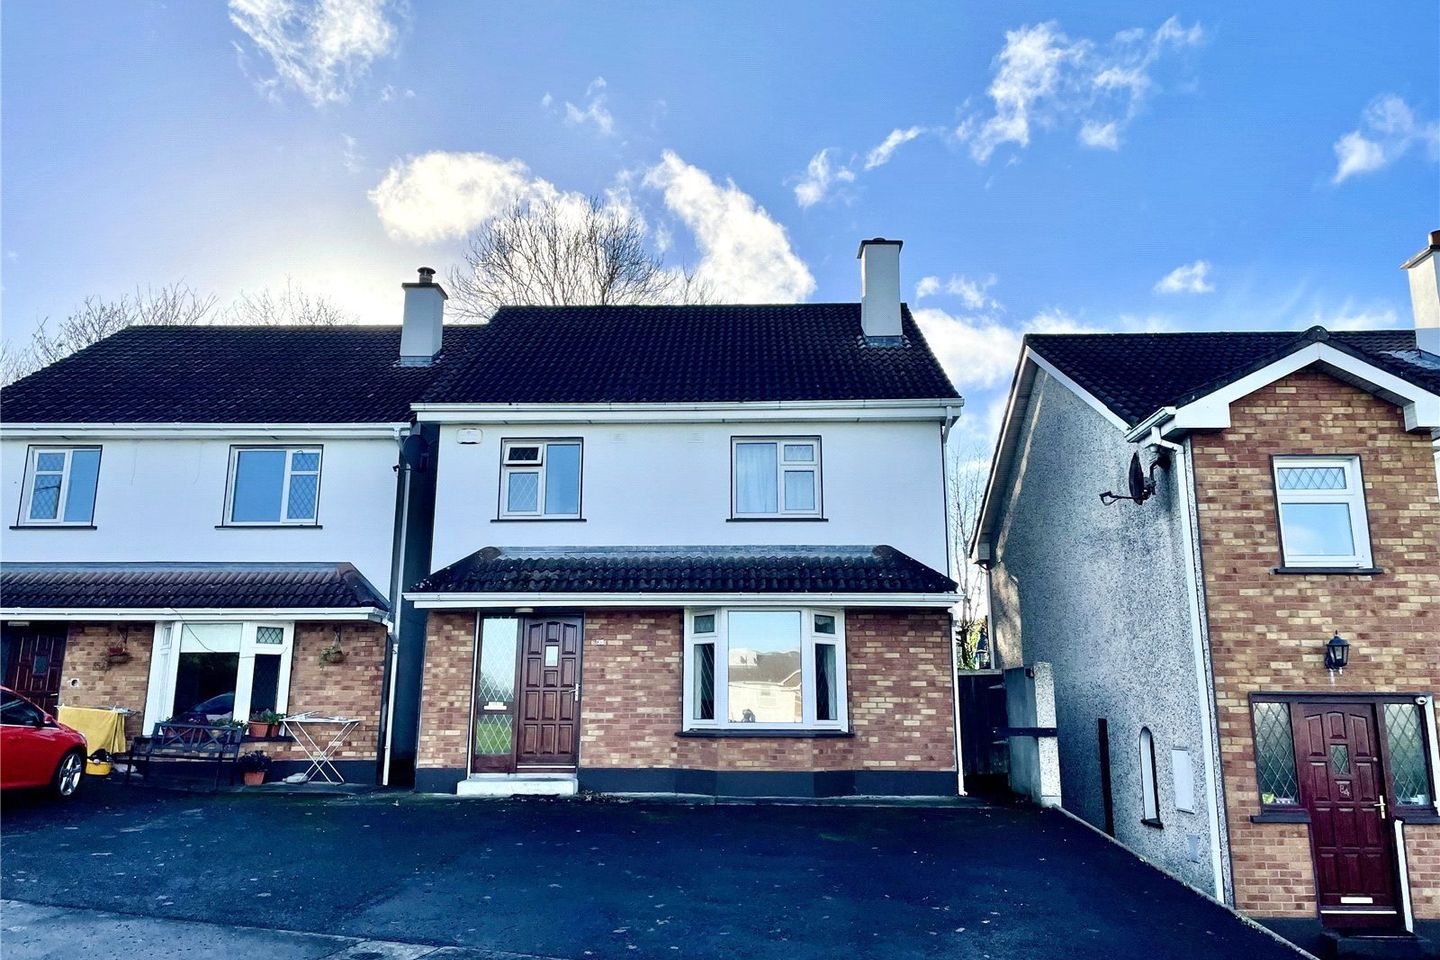 85 Cill Ard, Bohermore, Co. Galway